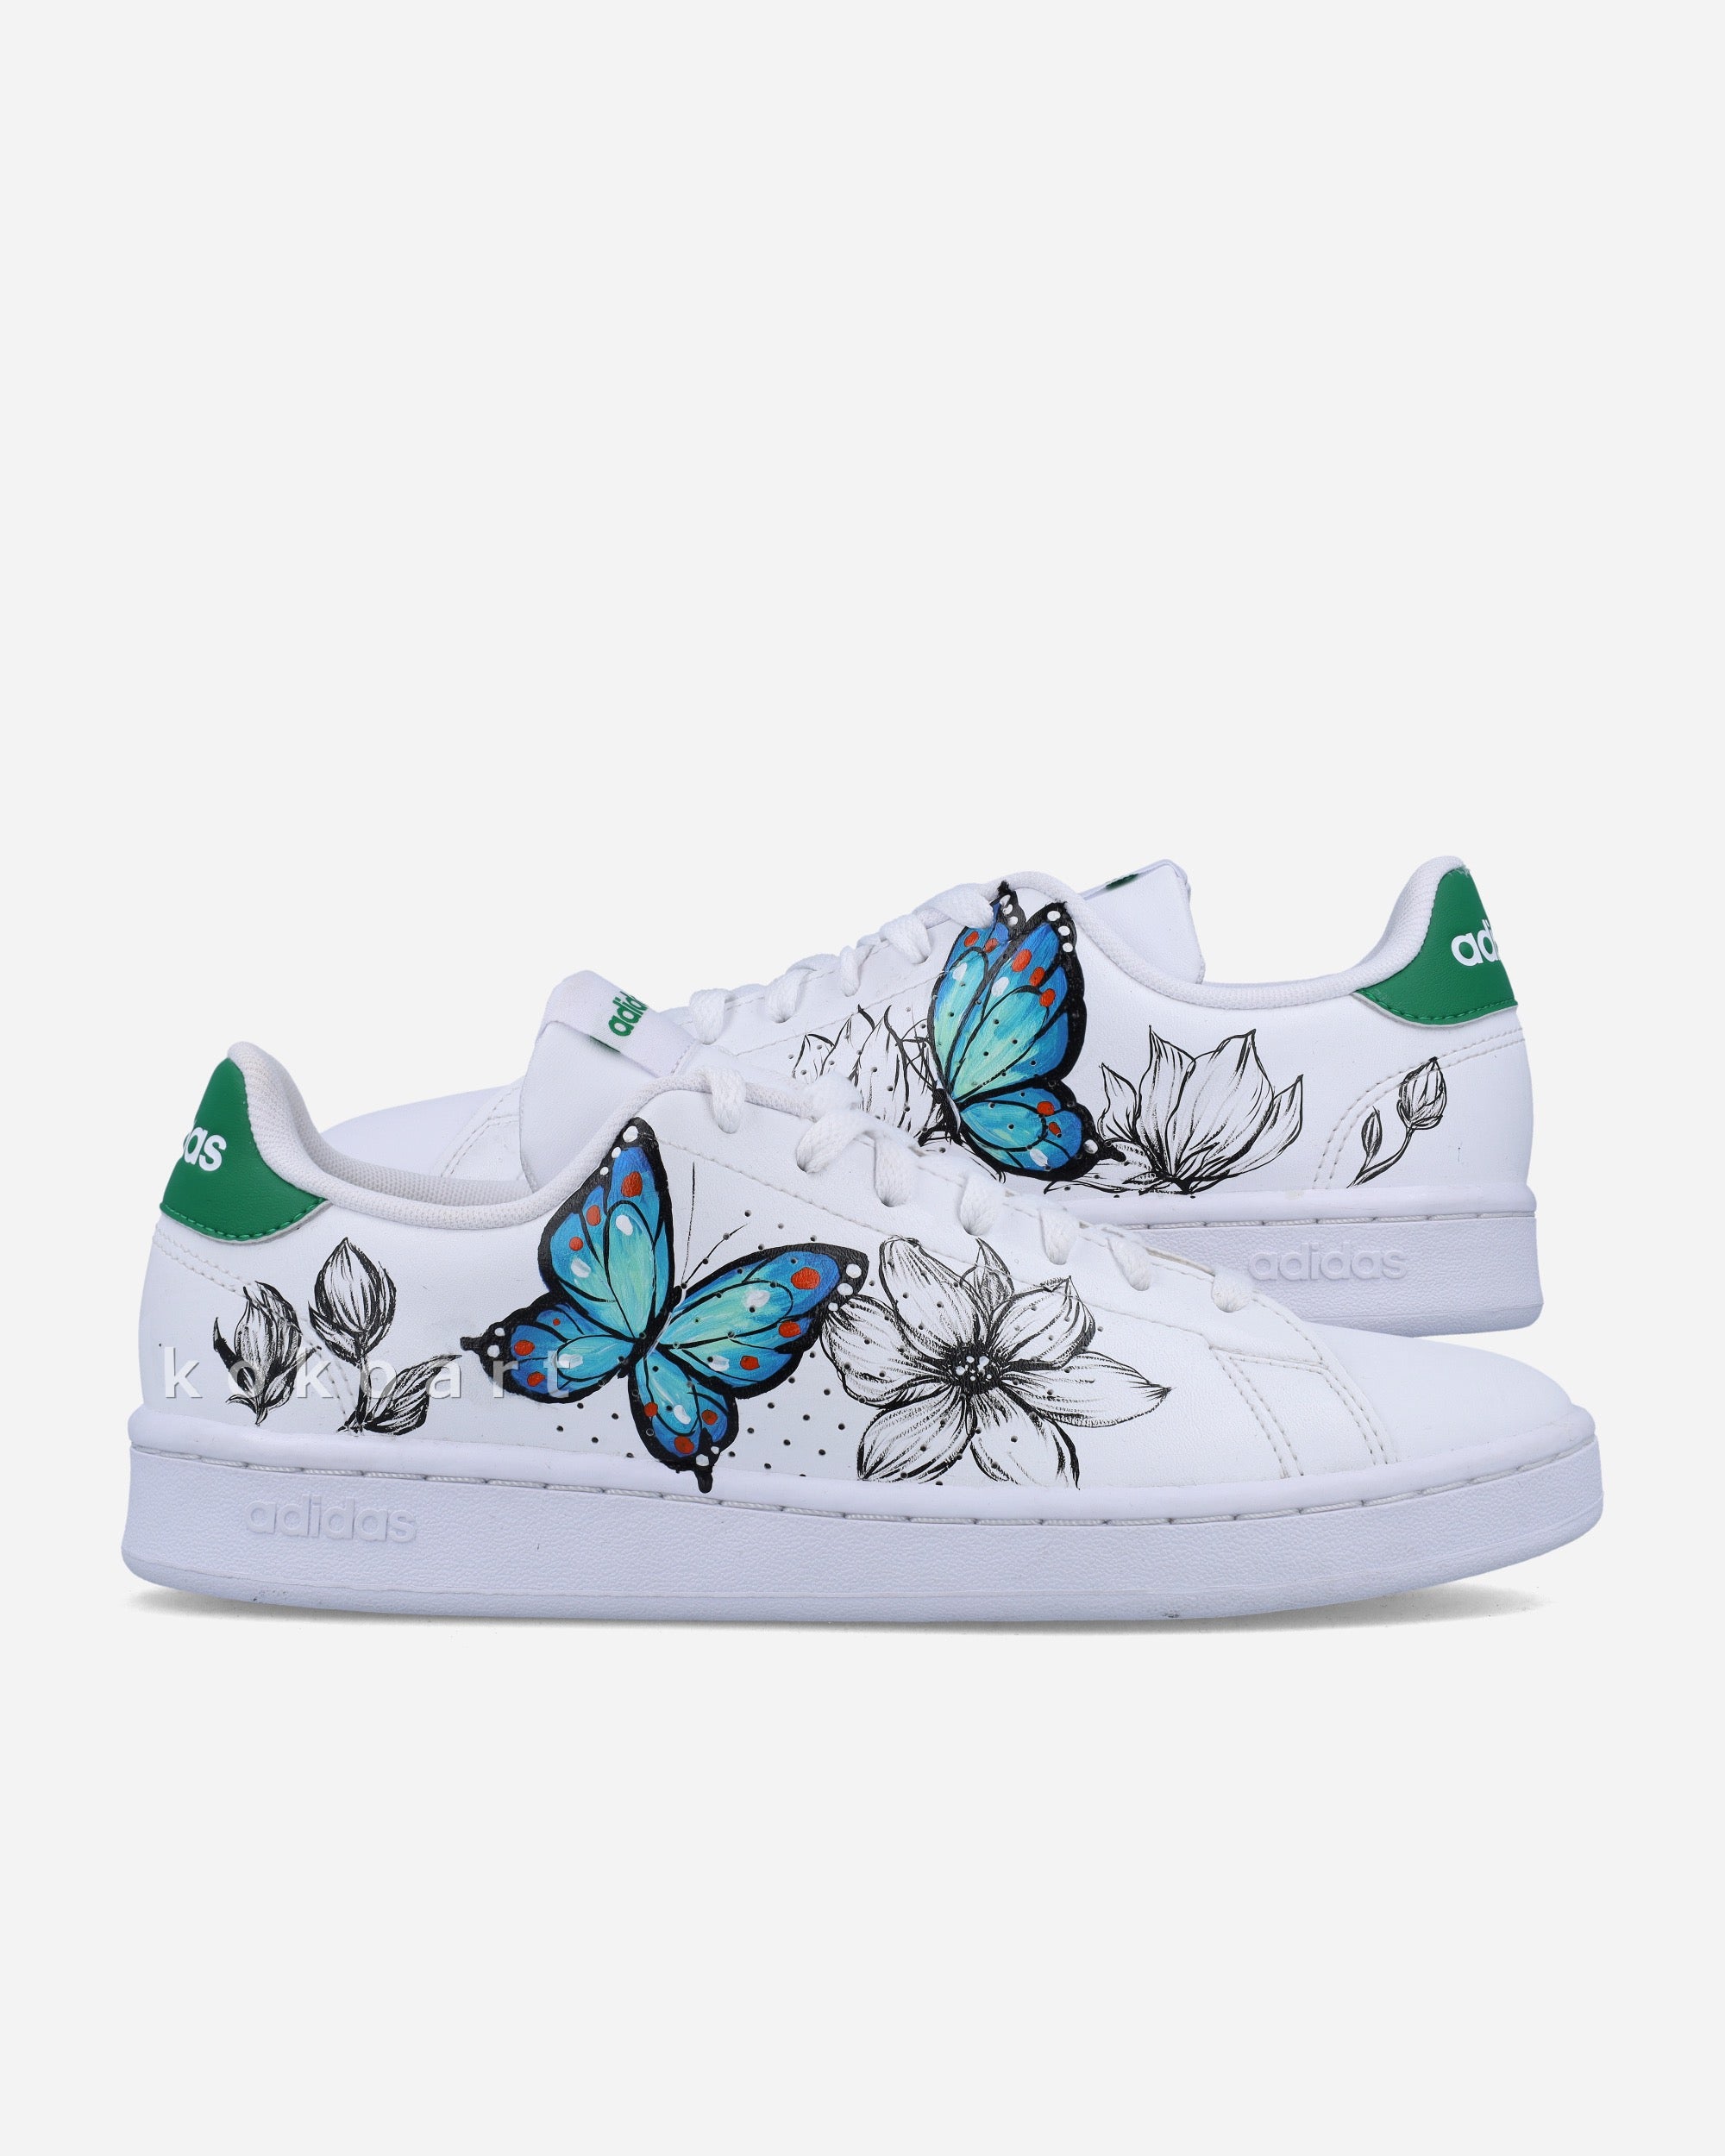 Adidas Hand Painted Butterflies and Flowers